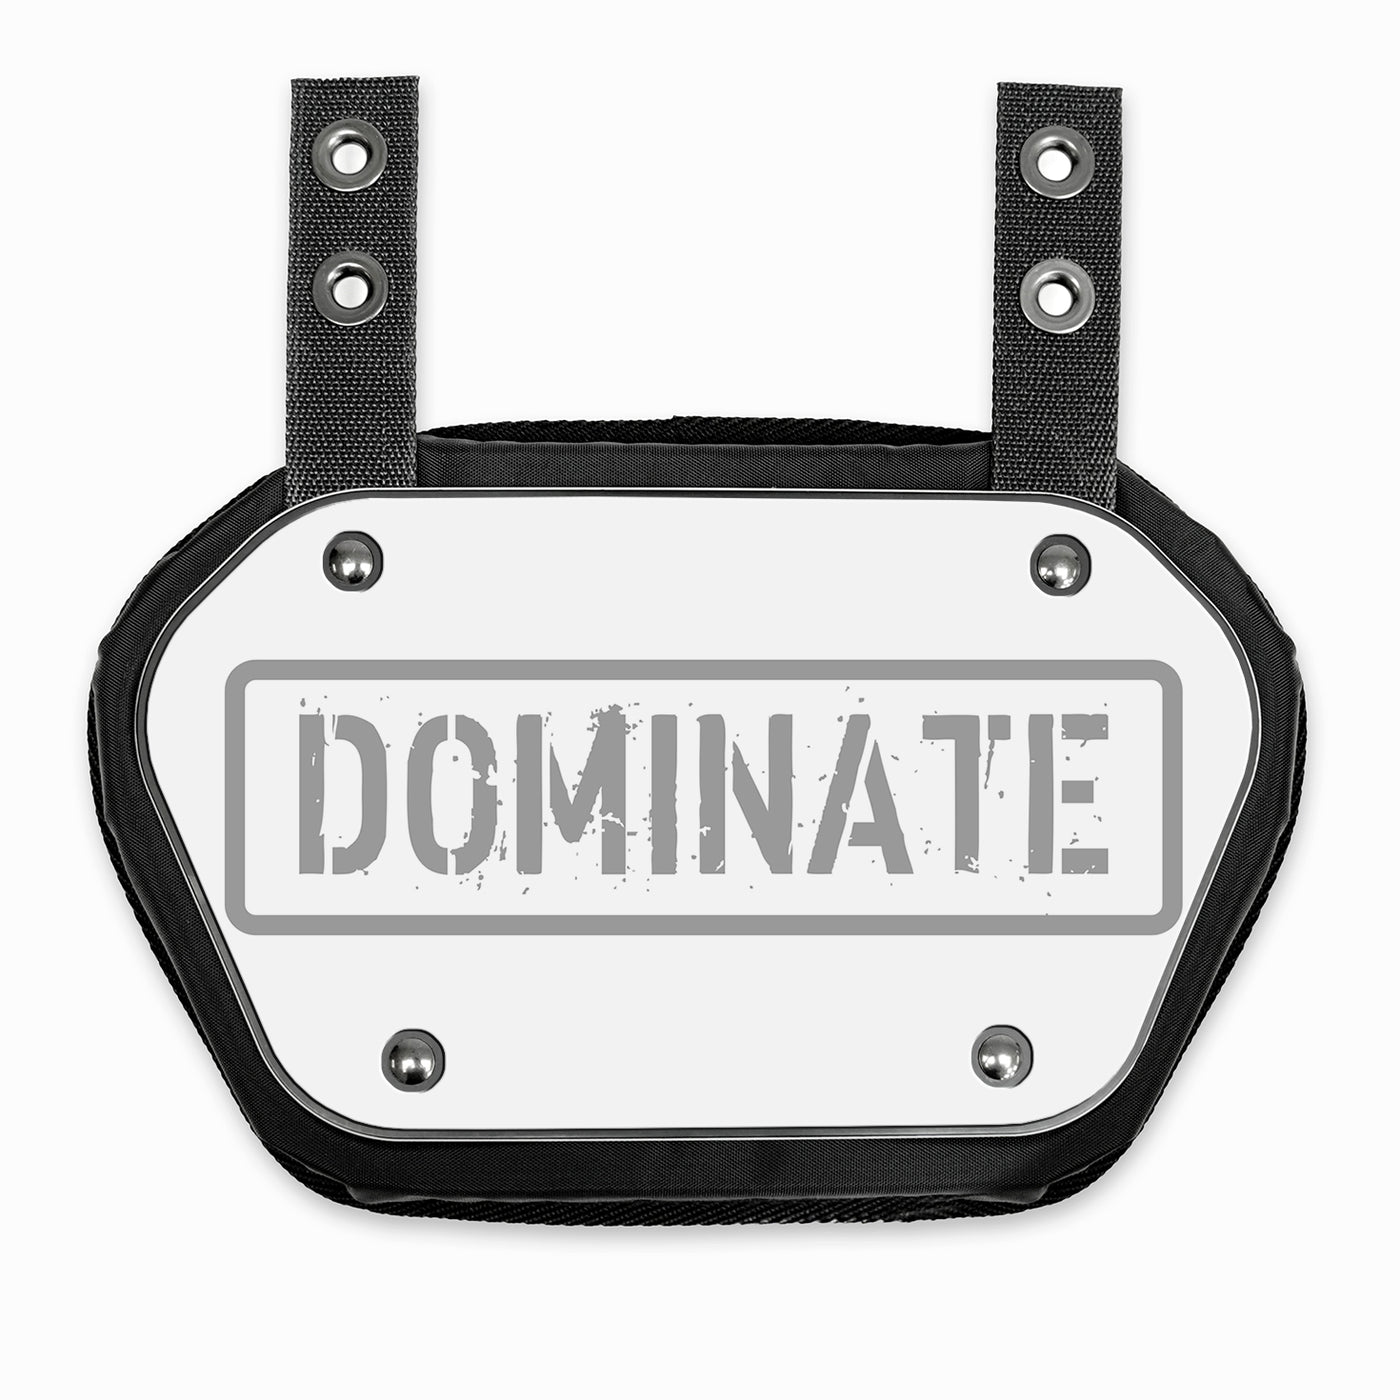 Dominate Sticker for Back Plate